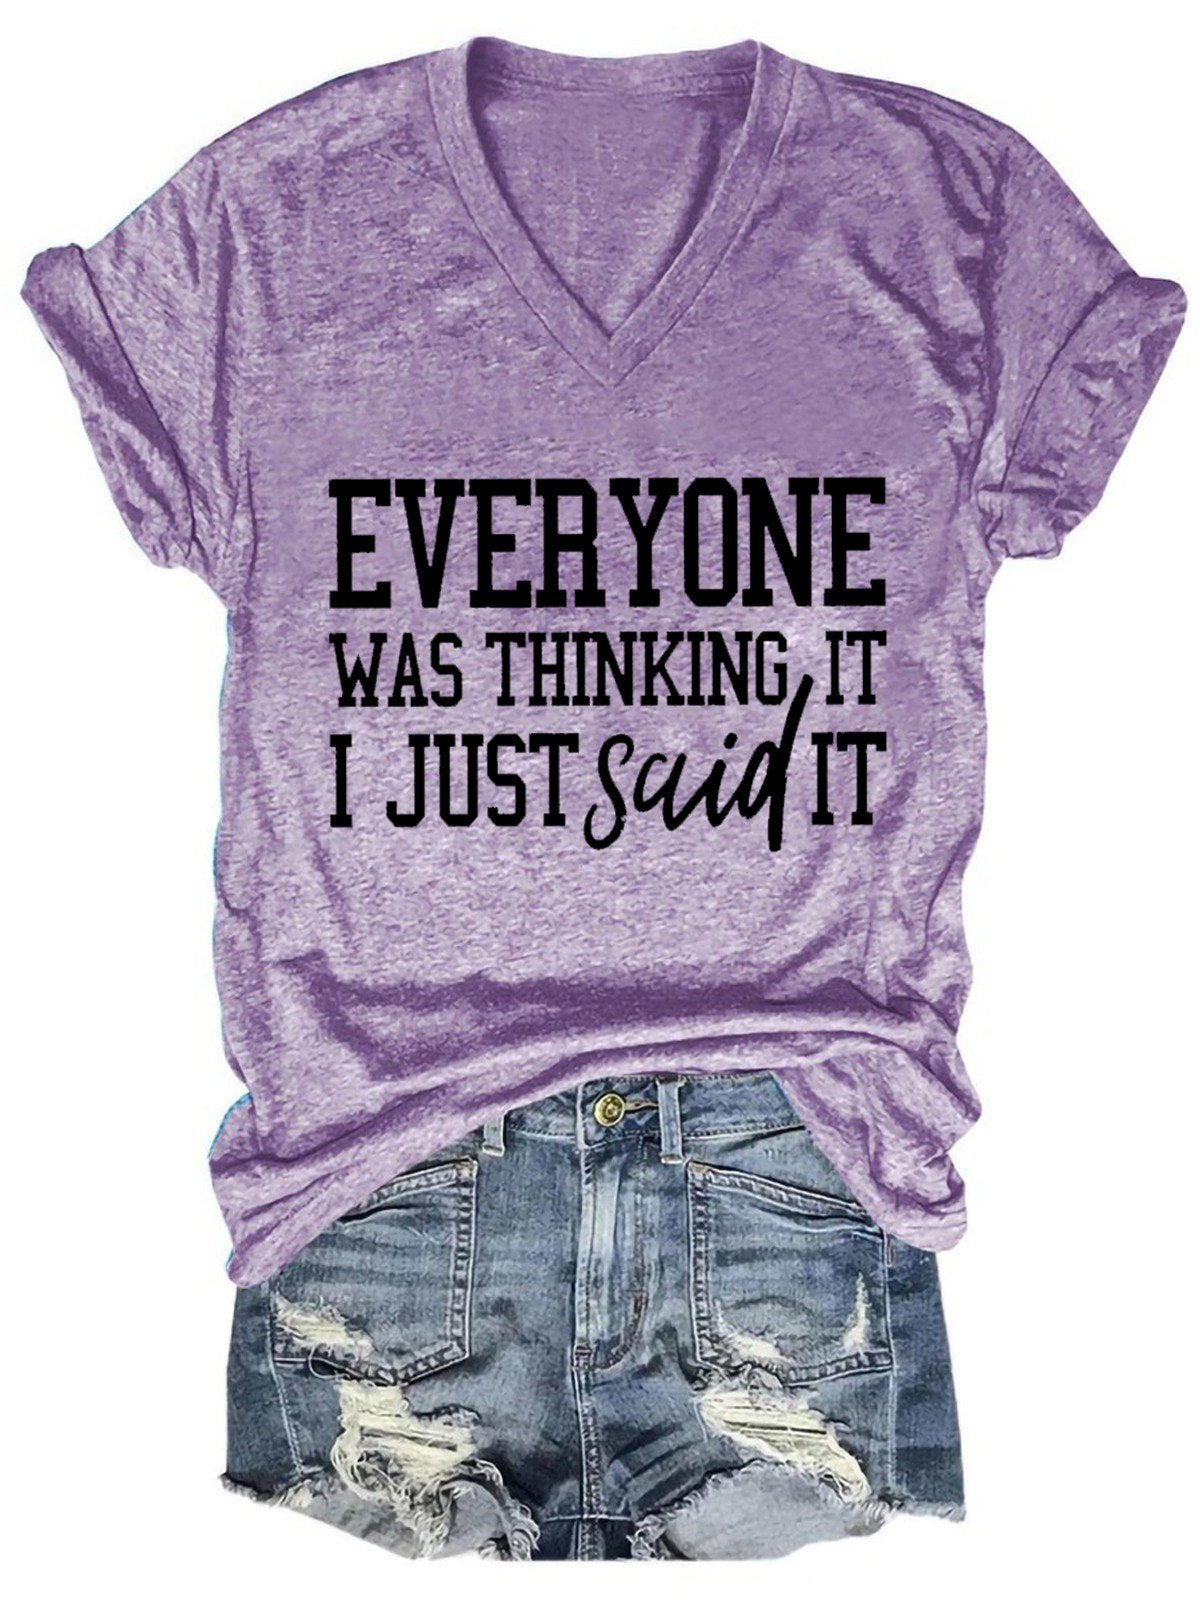 Women's Everyone Was Thinking It V-Neck T-Shirt - Outlets Forever